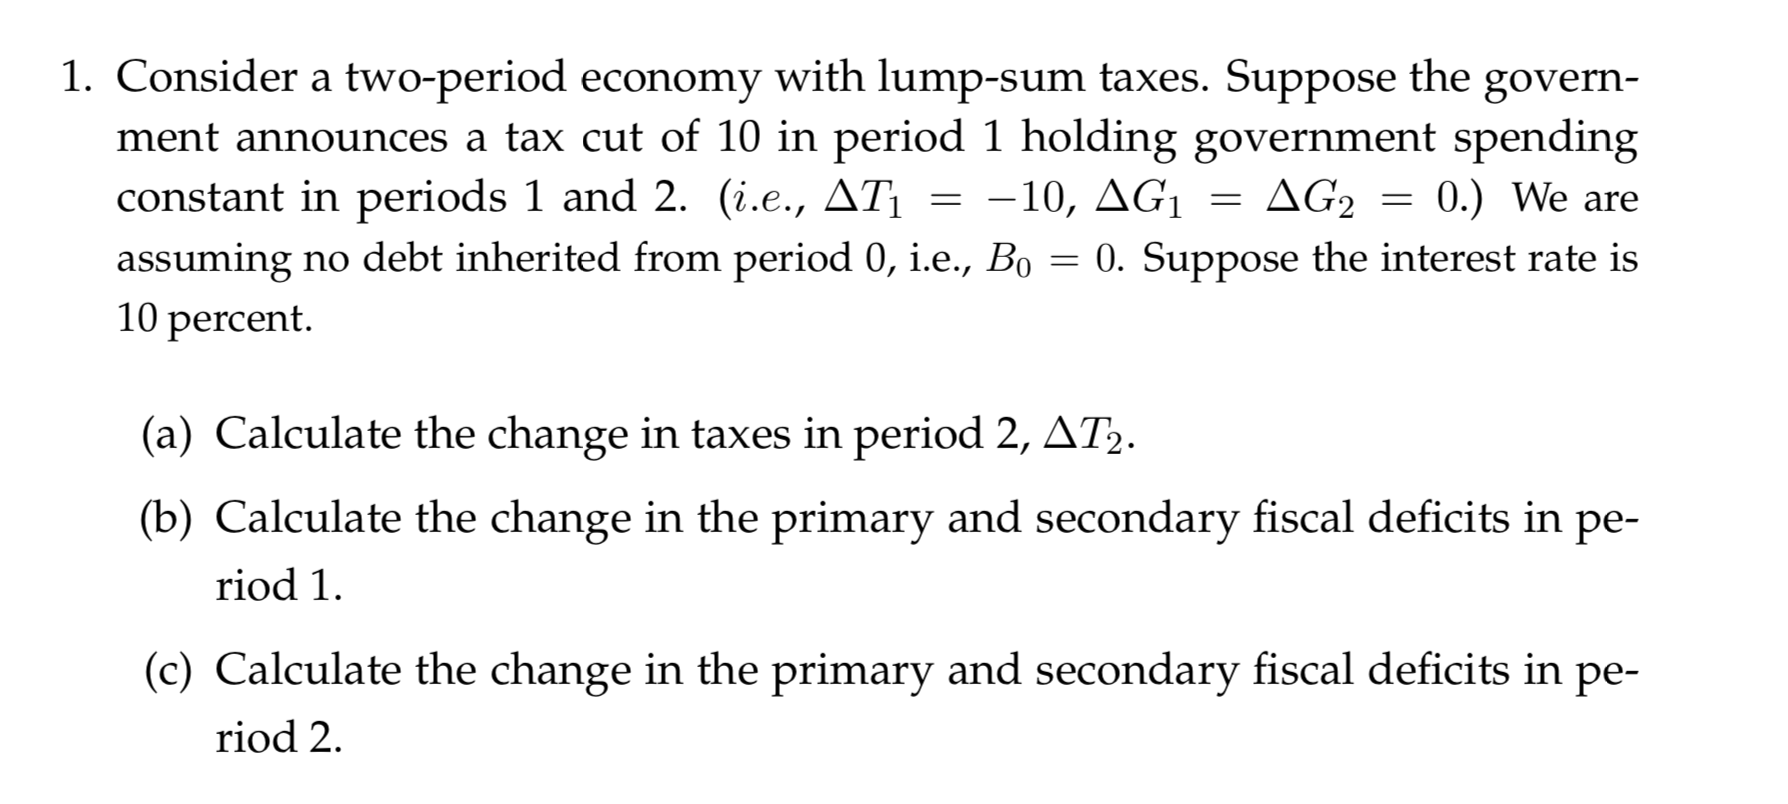 1. Consider a two-period economy with lump-sum taxes. Suppose the
ment announces a tax cut of 10 in period 1 holding government spending
constant in periods 1 and 2. (i.e., AT
assuming no debt inherited from period 0, i.e., Bo
10 percent
govern
ΔG,
0.) We are
-10, AG1
0. Suppose the interest rate is
(a) Calculate the change in taxes in period 2, AT2.
(b) Calculate the change in the primary and secondary fiscal deficits in
ре-
riod 1
(c) Calculate the change in the primary and secondary fiscal deficits in pe-
riod 2
